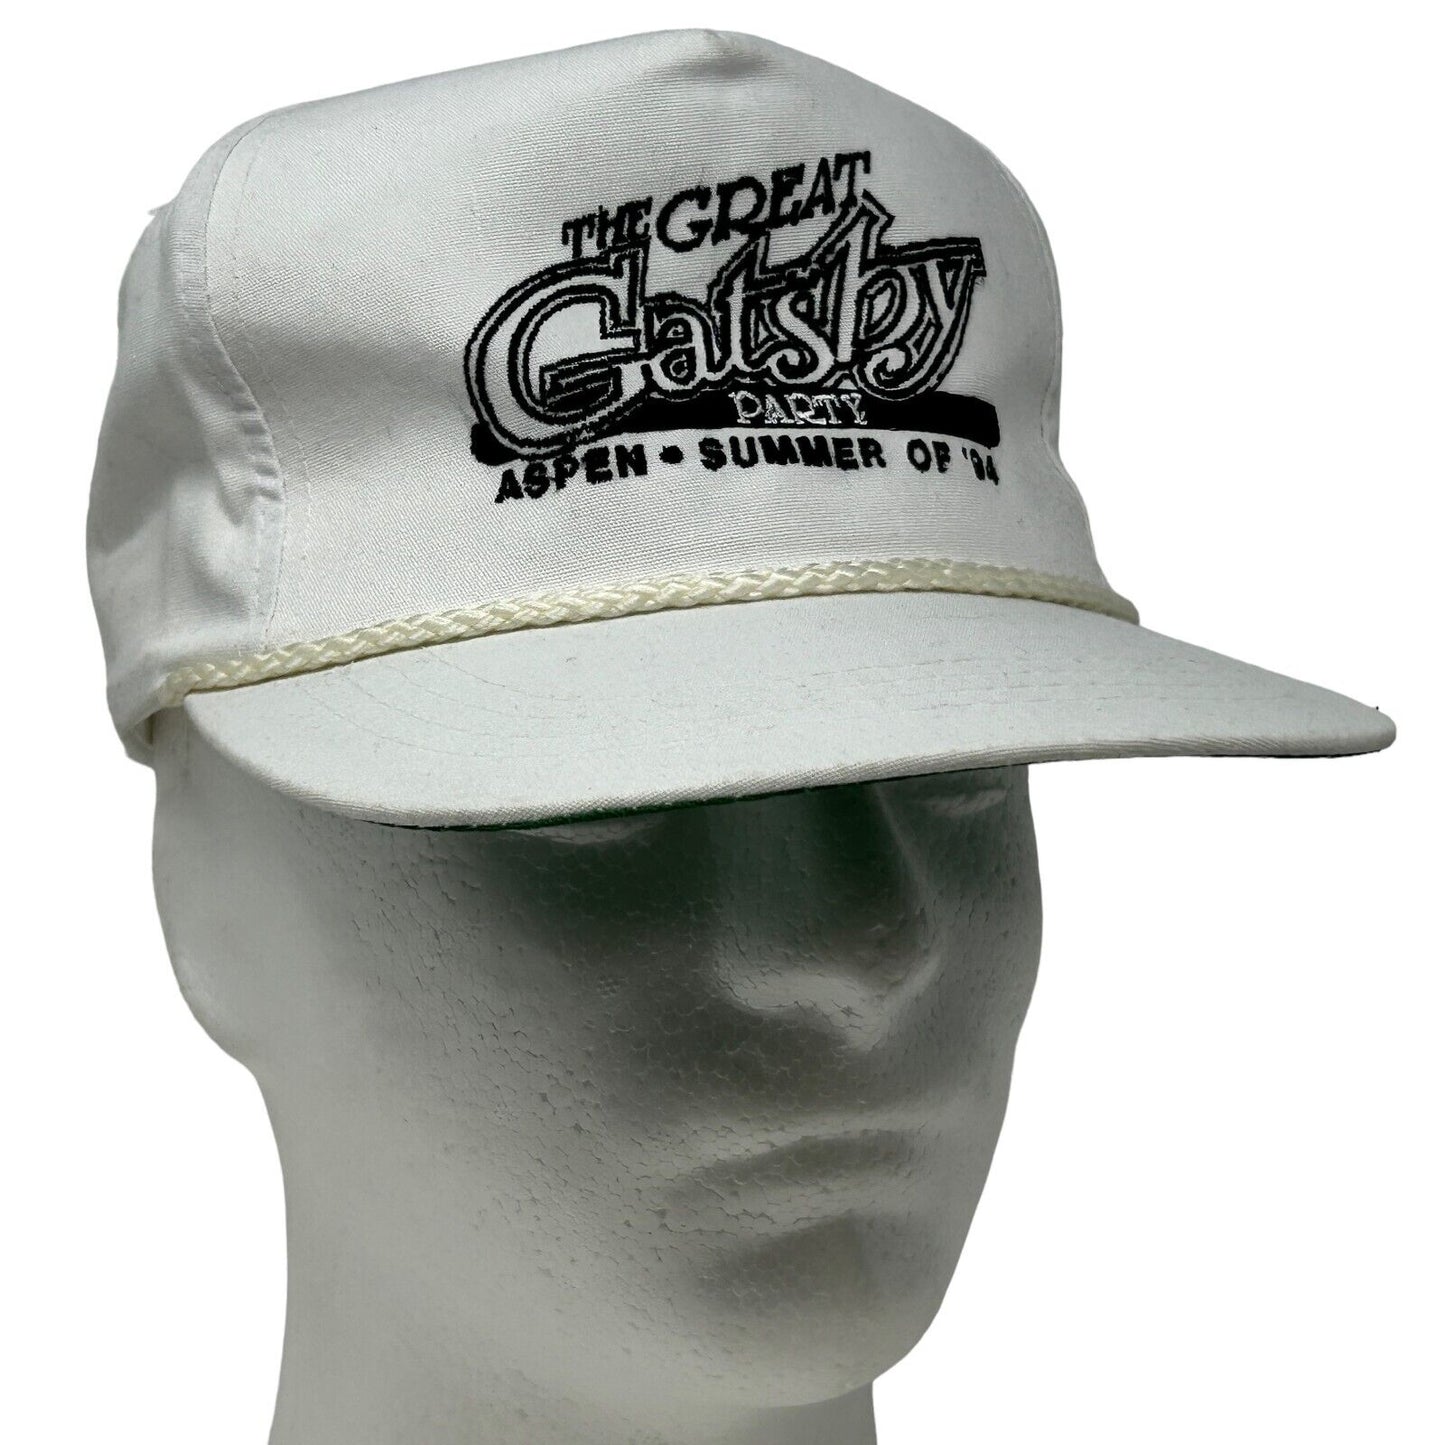 The Great Gatsby Party Hat Vintage 90s White Aspen Colorado Rope Baseball Cap